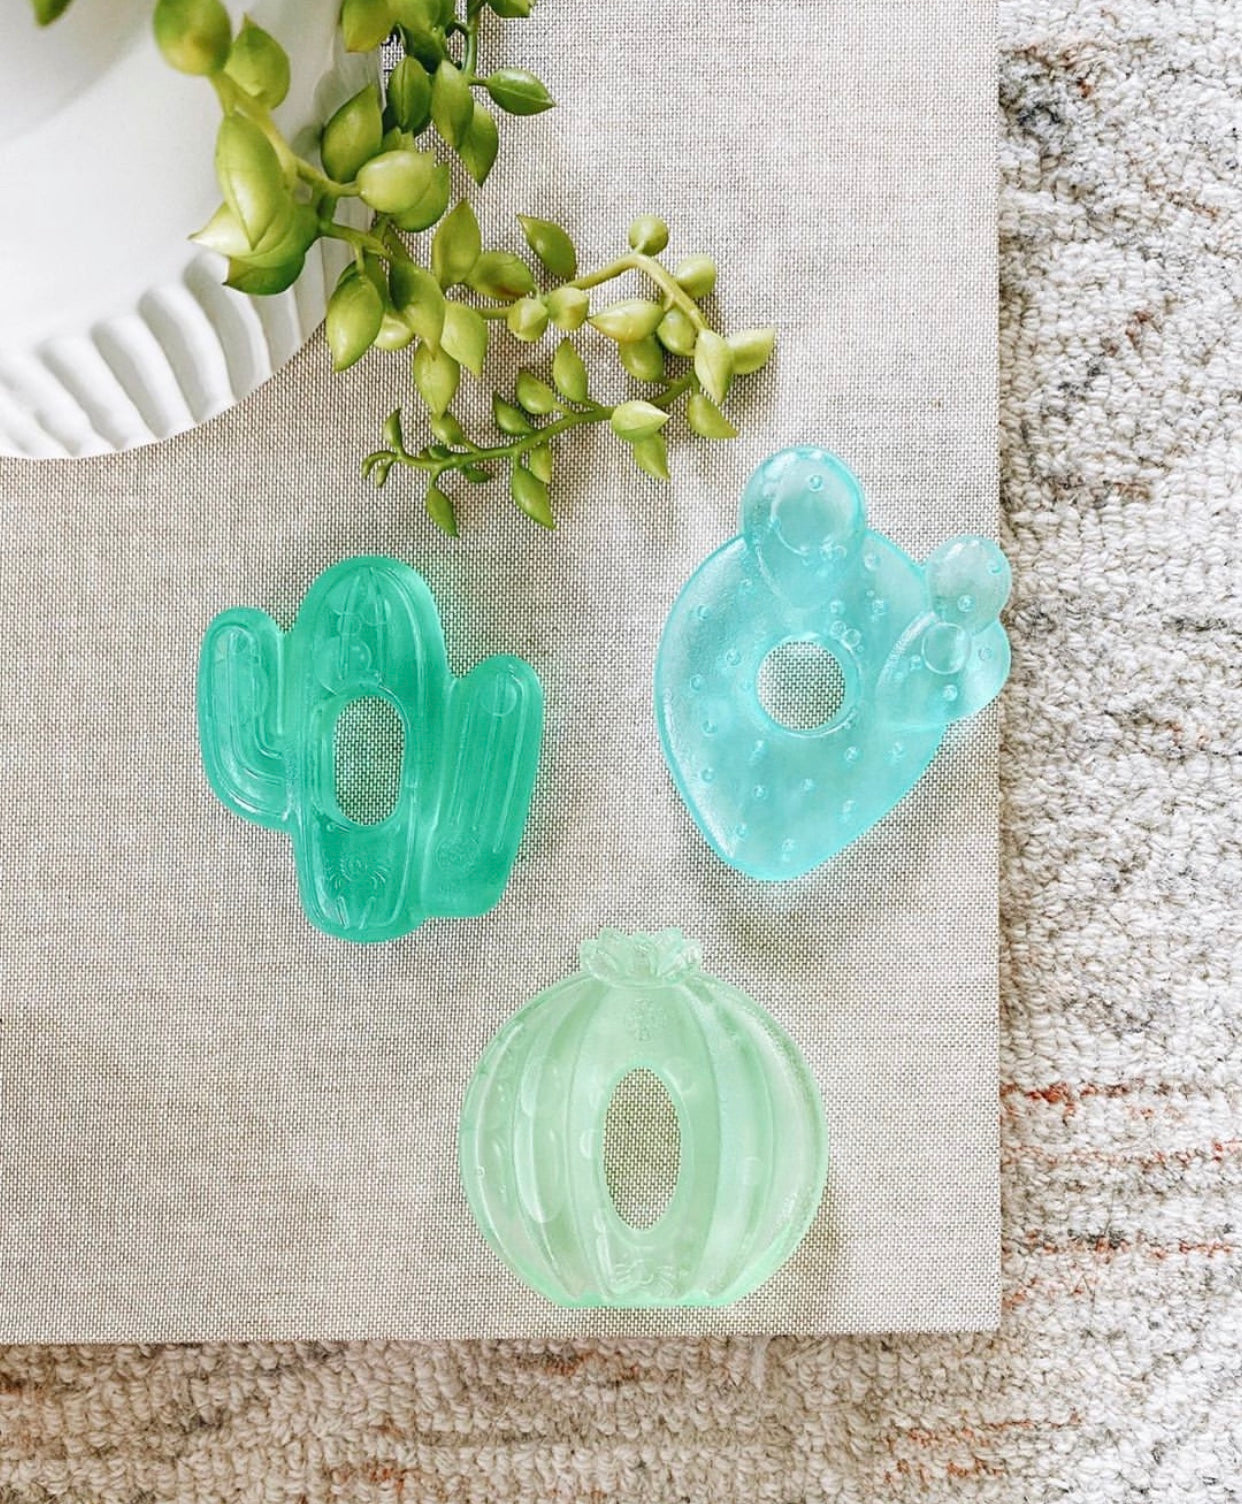 itzy ritzy cactus water filled teethers